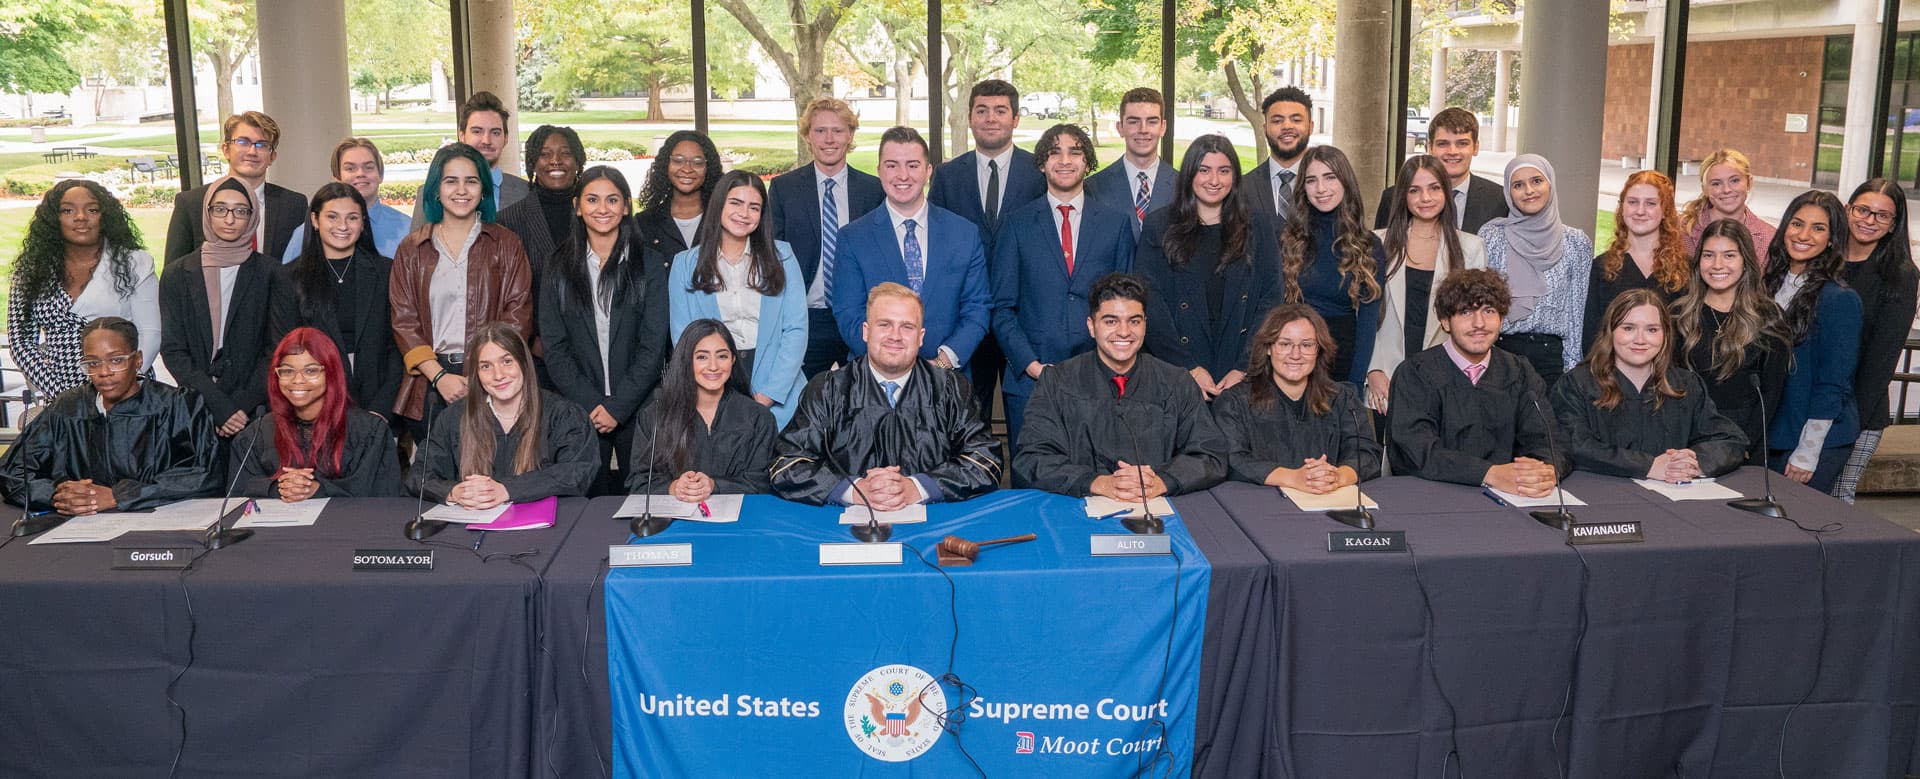 Detroit Mercy Students participating in Moot Court as Supreme Court Justices